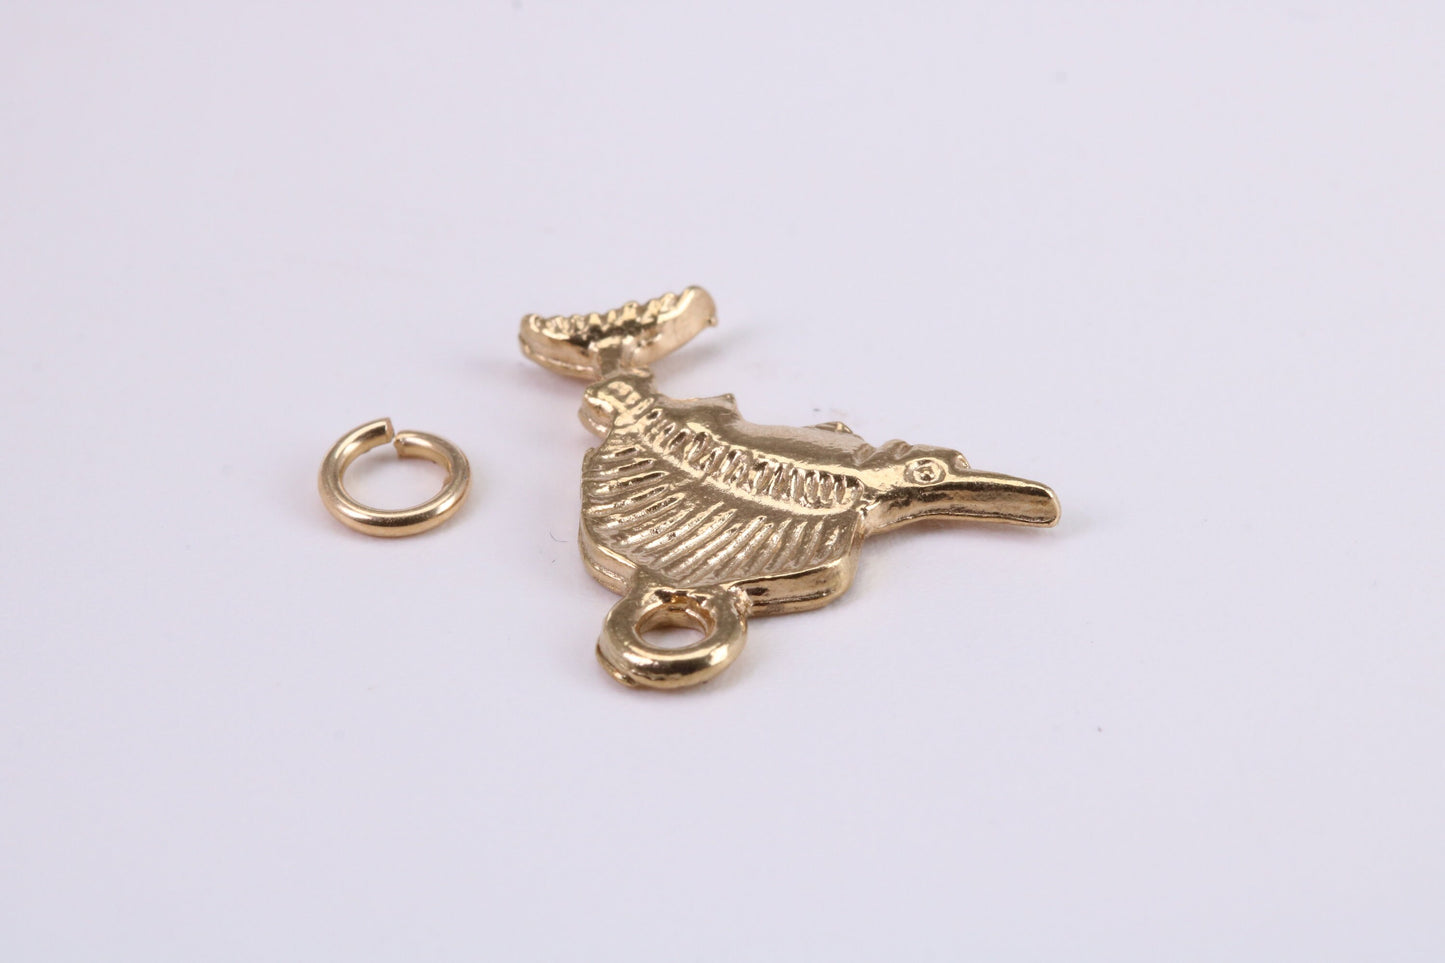 Sail Fish Charm, Traditional Charm, Made from Solid Yellow Gold, British Hallmarked, Complete with Attachment Link